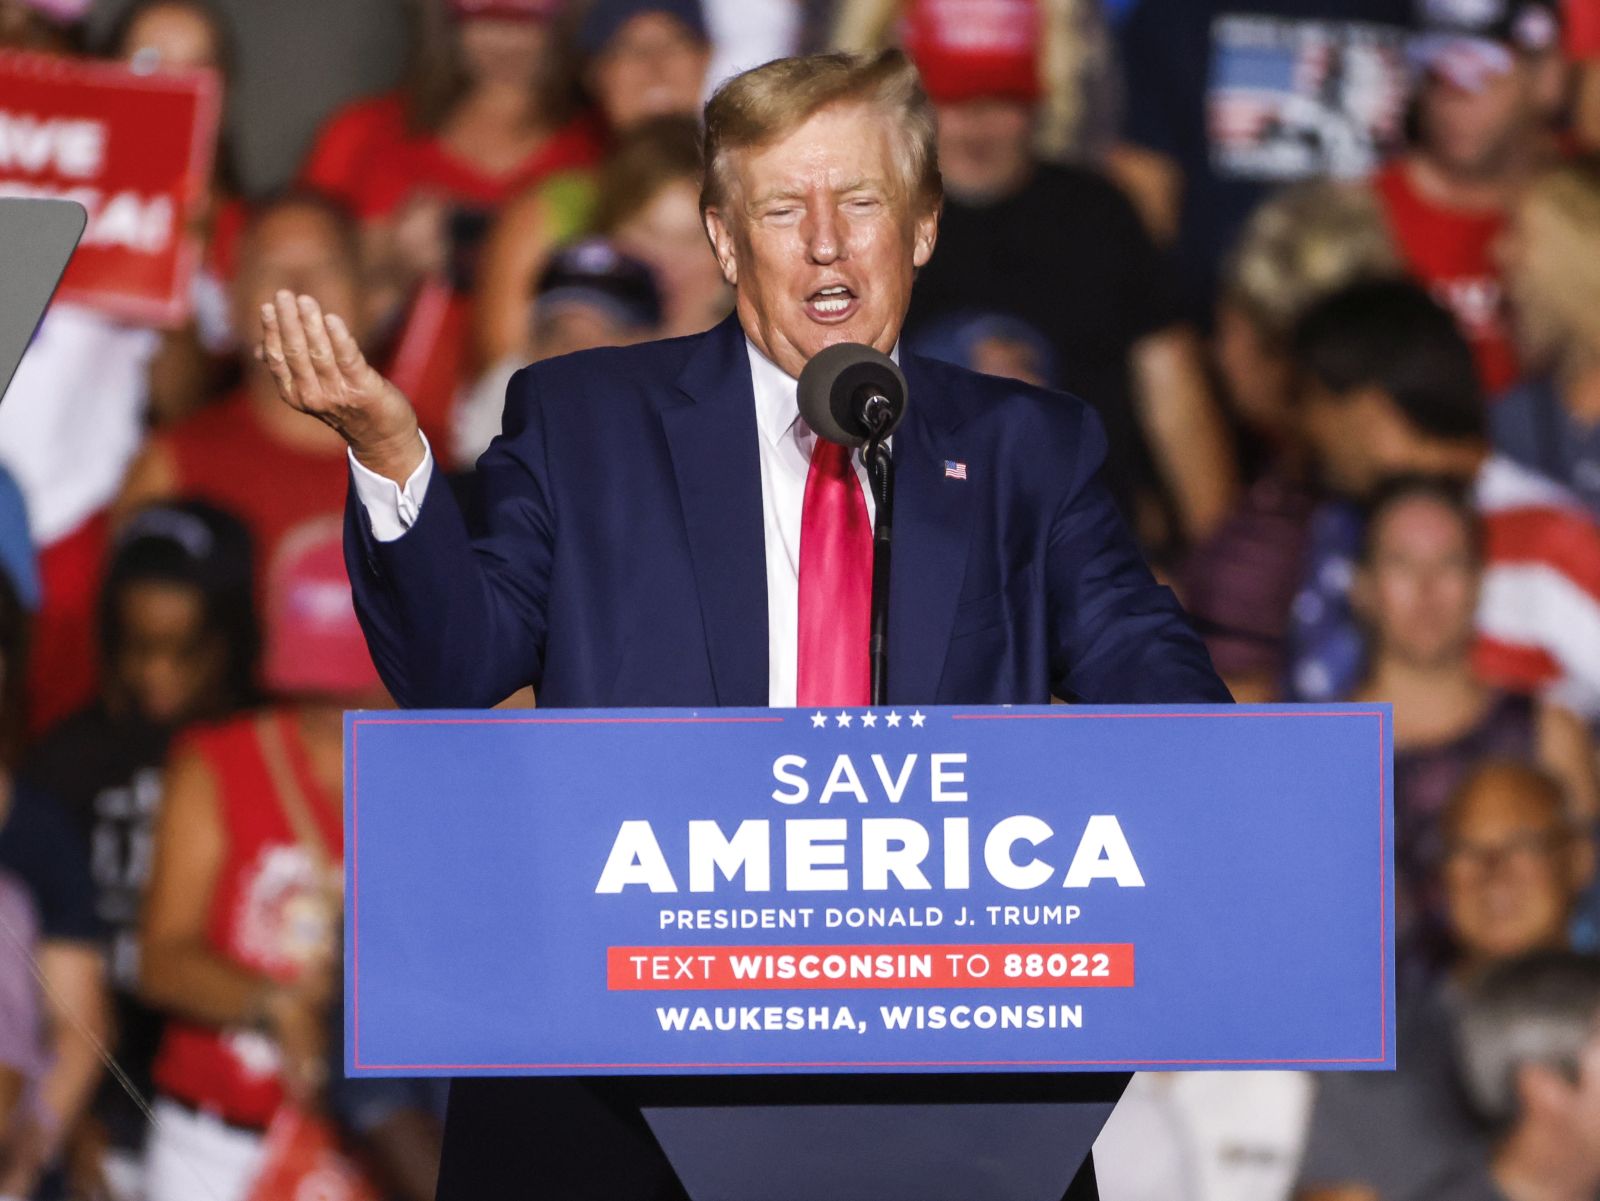 epa10108235 Former US President Donald J. Trump speaks at a Save America Rally in Waukesha, Wisconsin, USA, 05 August 2022. Trump was campaigning for Wisconsin Republican gubernatorial Tim Michaels, US Senator Ron Johnson and US House candidate Derrick Van Orden. Voters go the polls to vote in the primary election on 09 August.  EPA/TANNEN MAURY